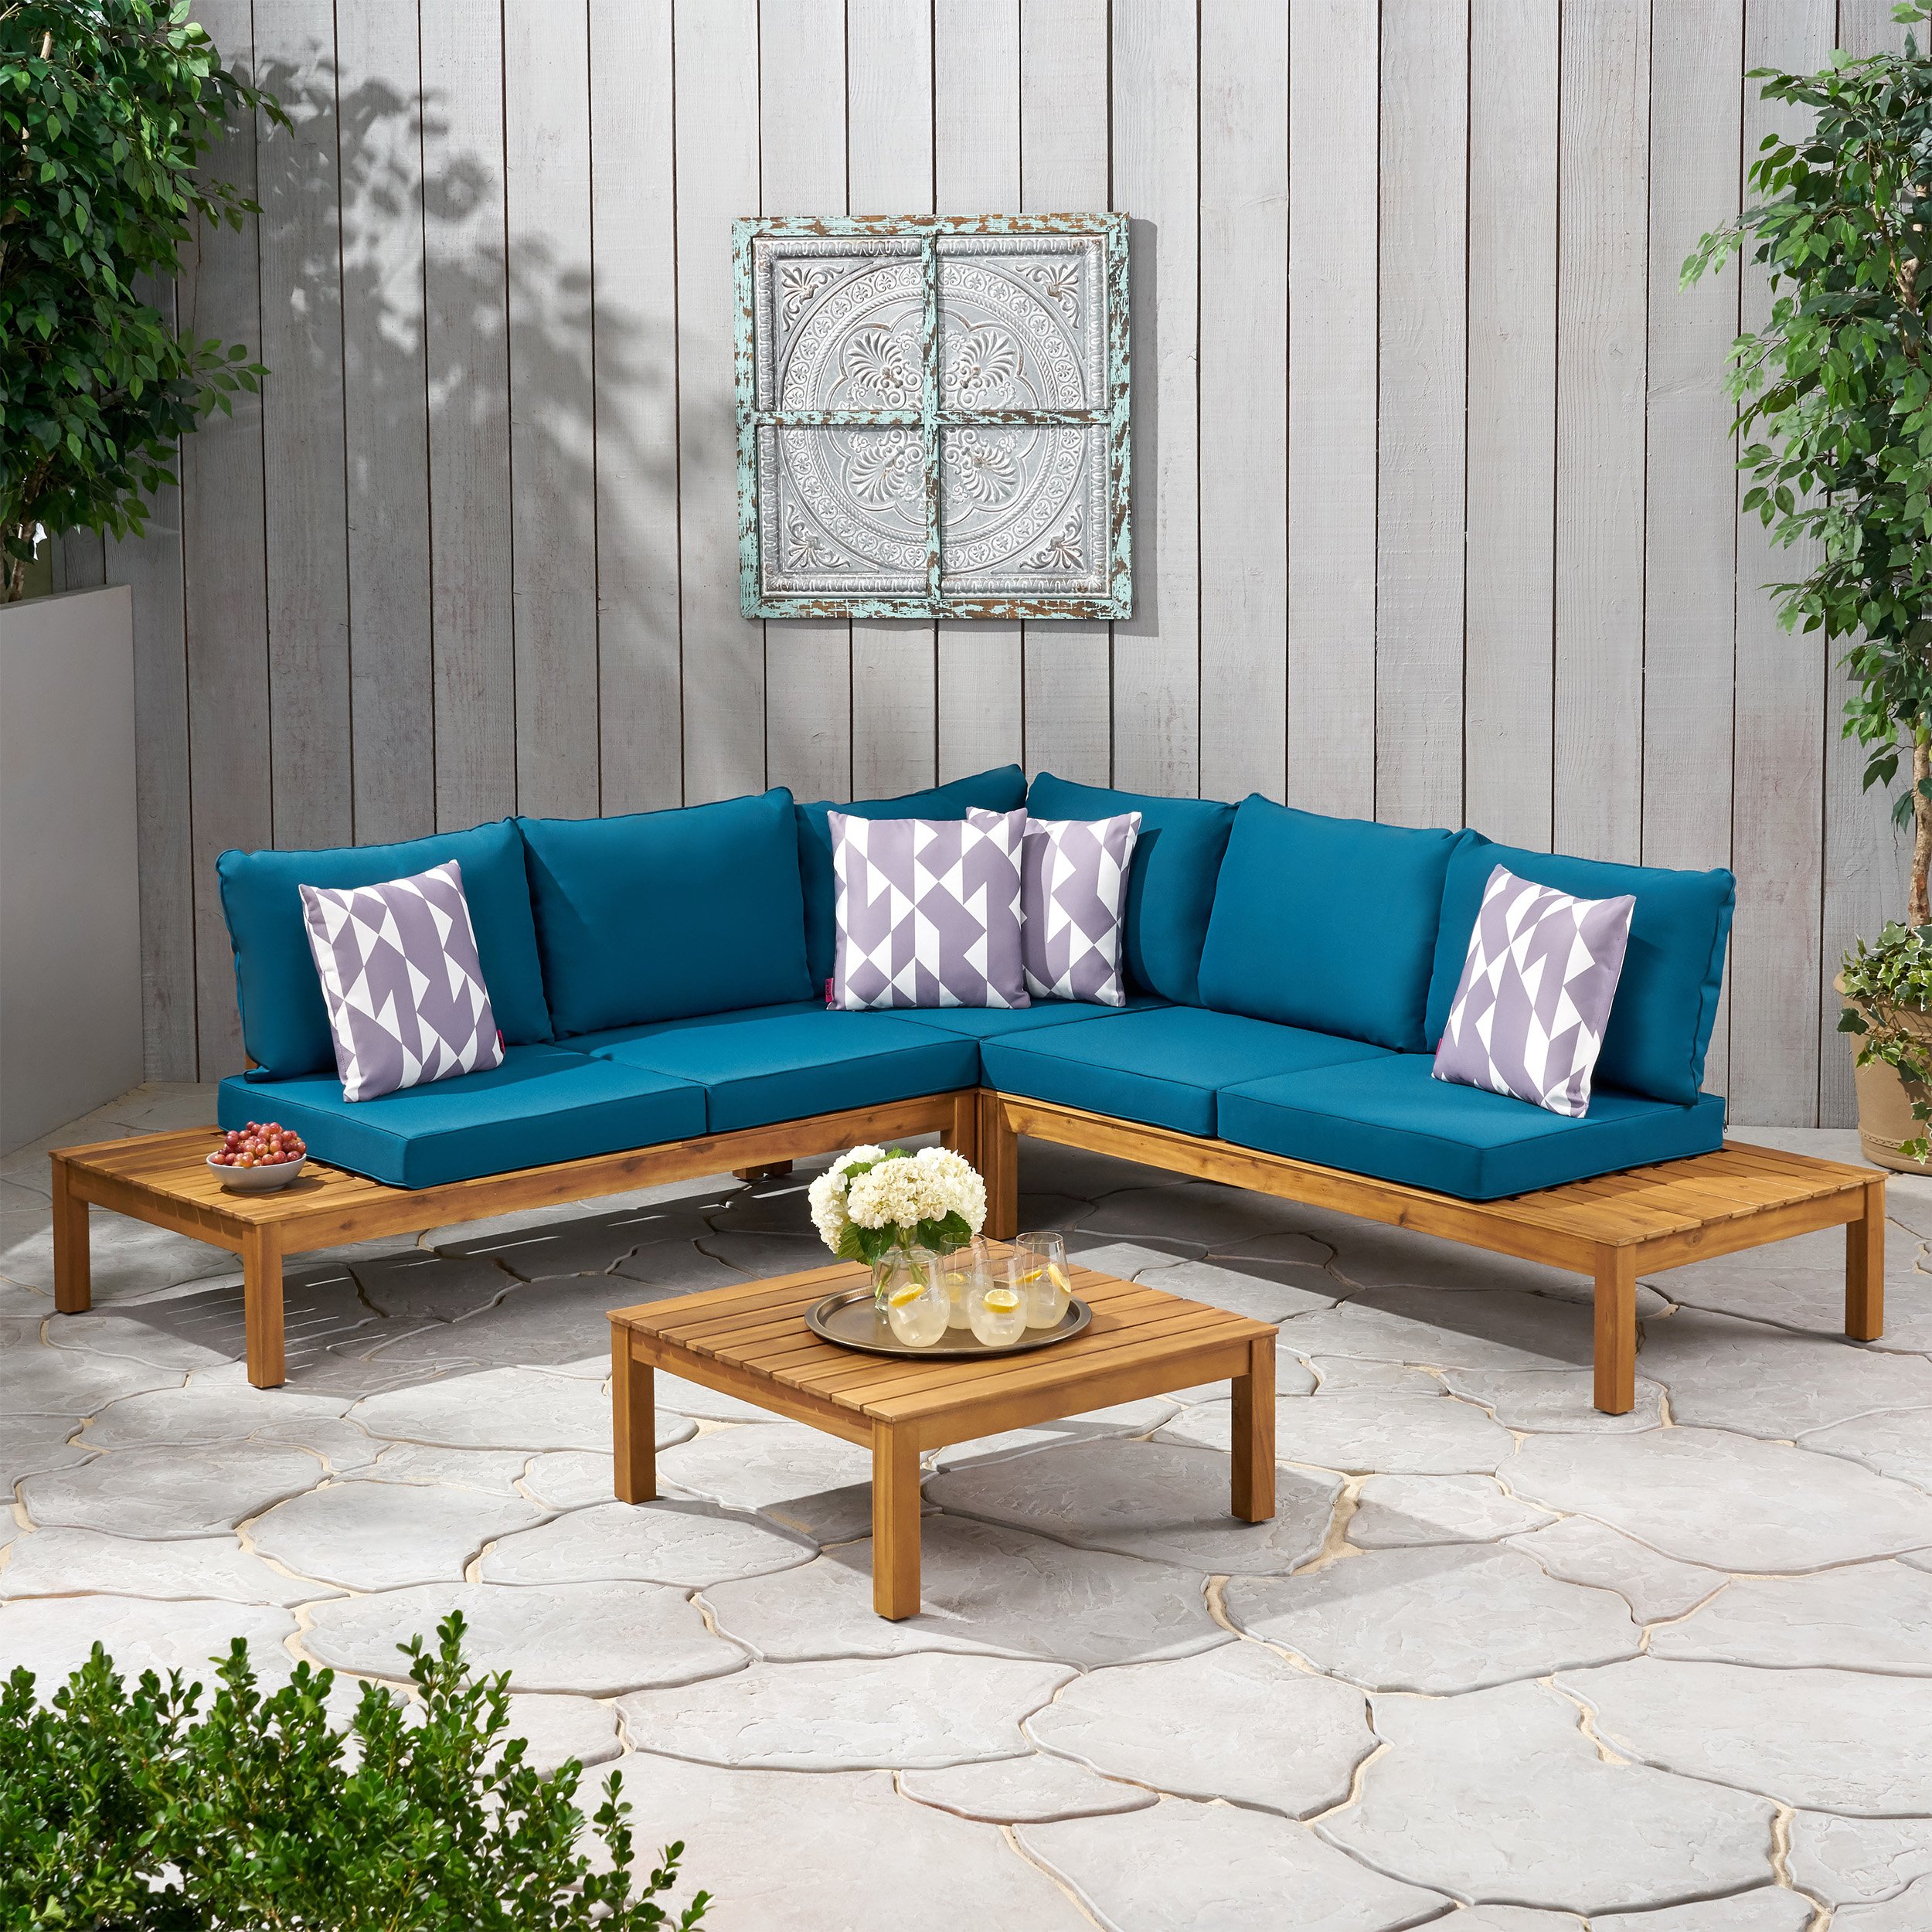 Bunny Outdoor 5 Seater V Shaped Acacia Wood Sectional Sofa Set With Cushions - Teak Finish + Dark Teal